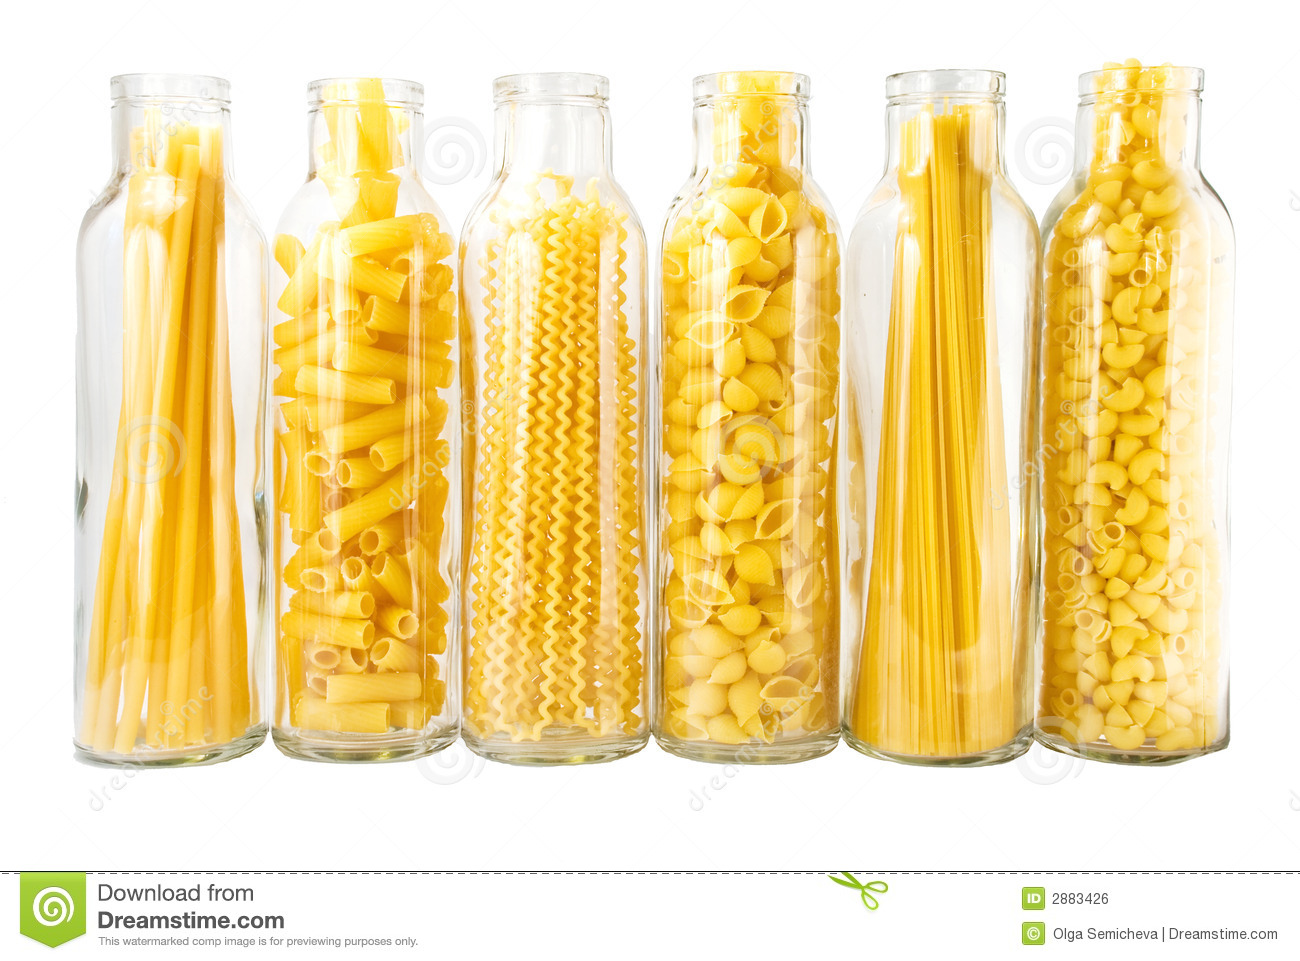 Different Grades Of Pasta Royalty Free Stock Image   Image  2883426